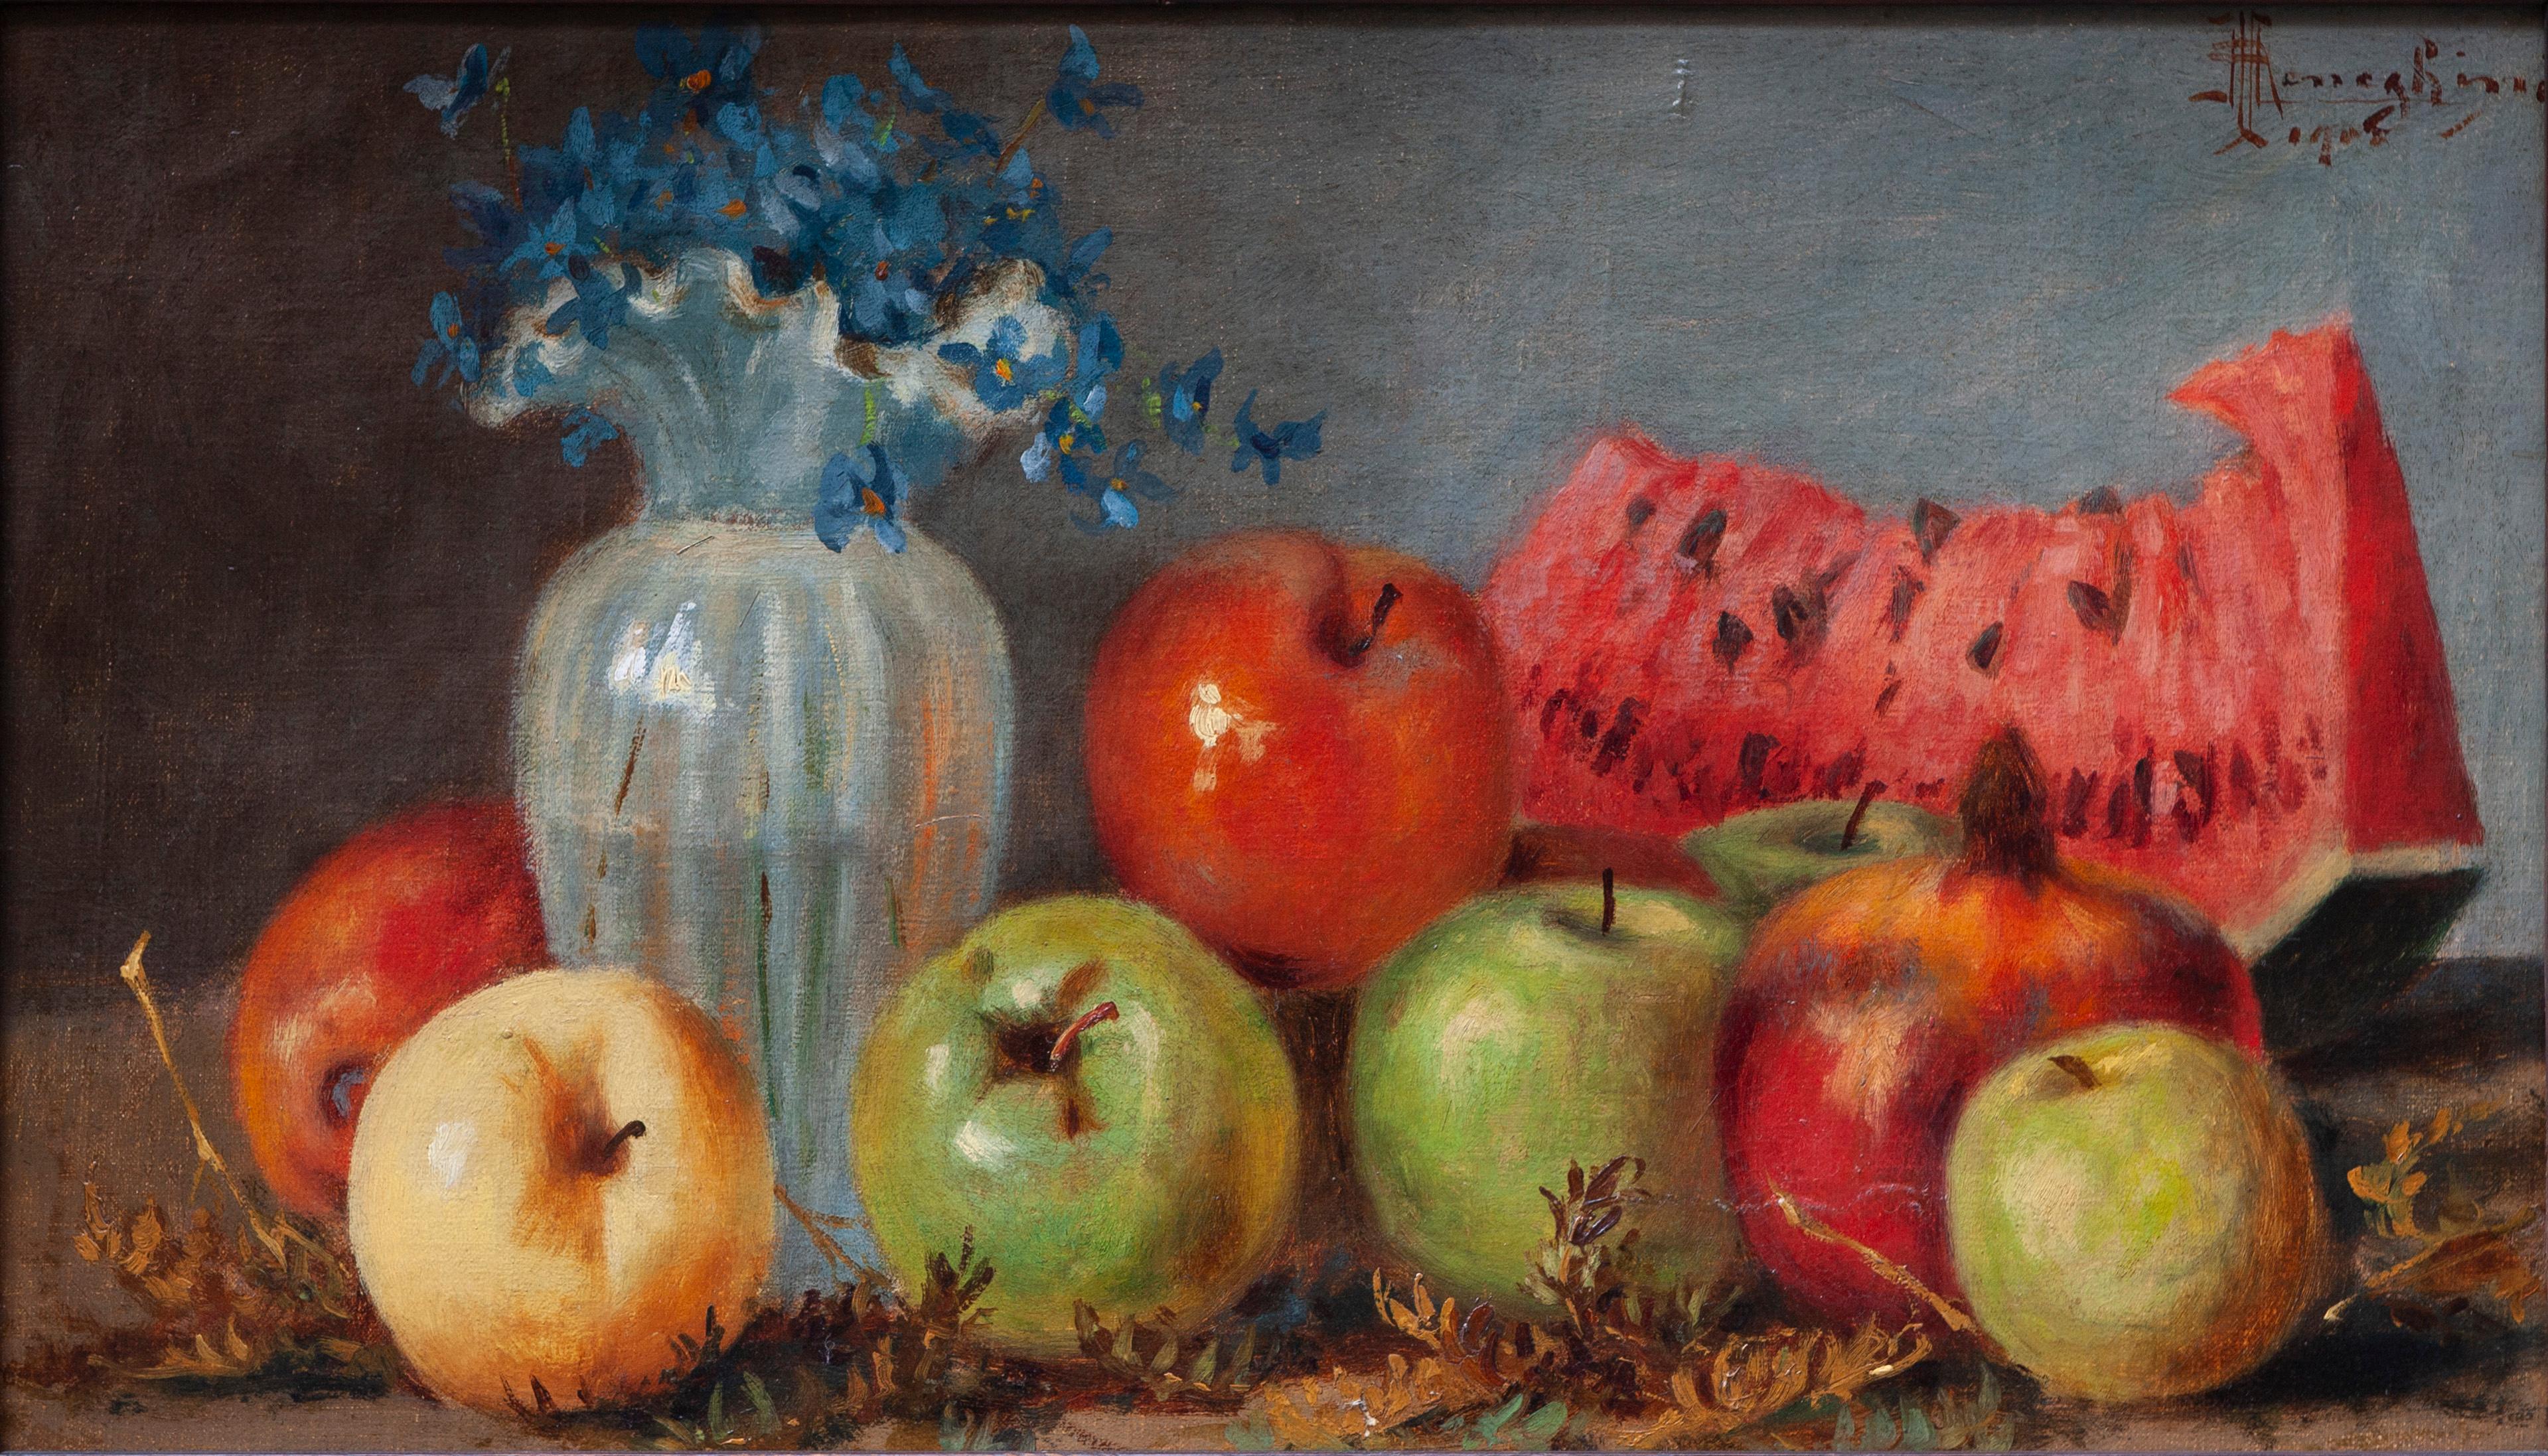 Still life with watermelon, apples and vase of flowers - Painting by Ruggero Meneghini